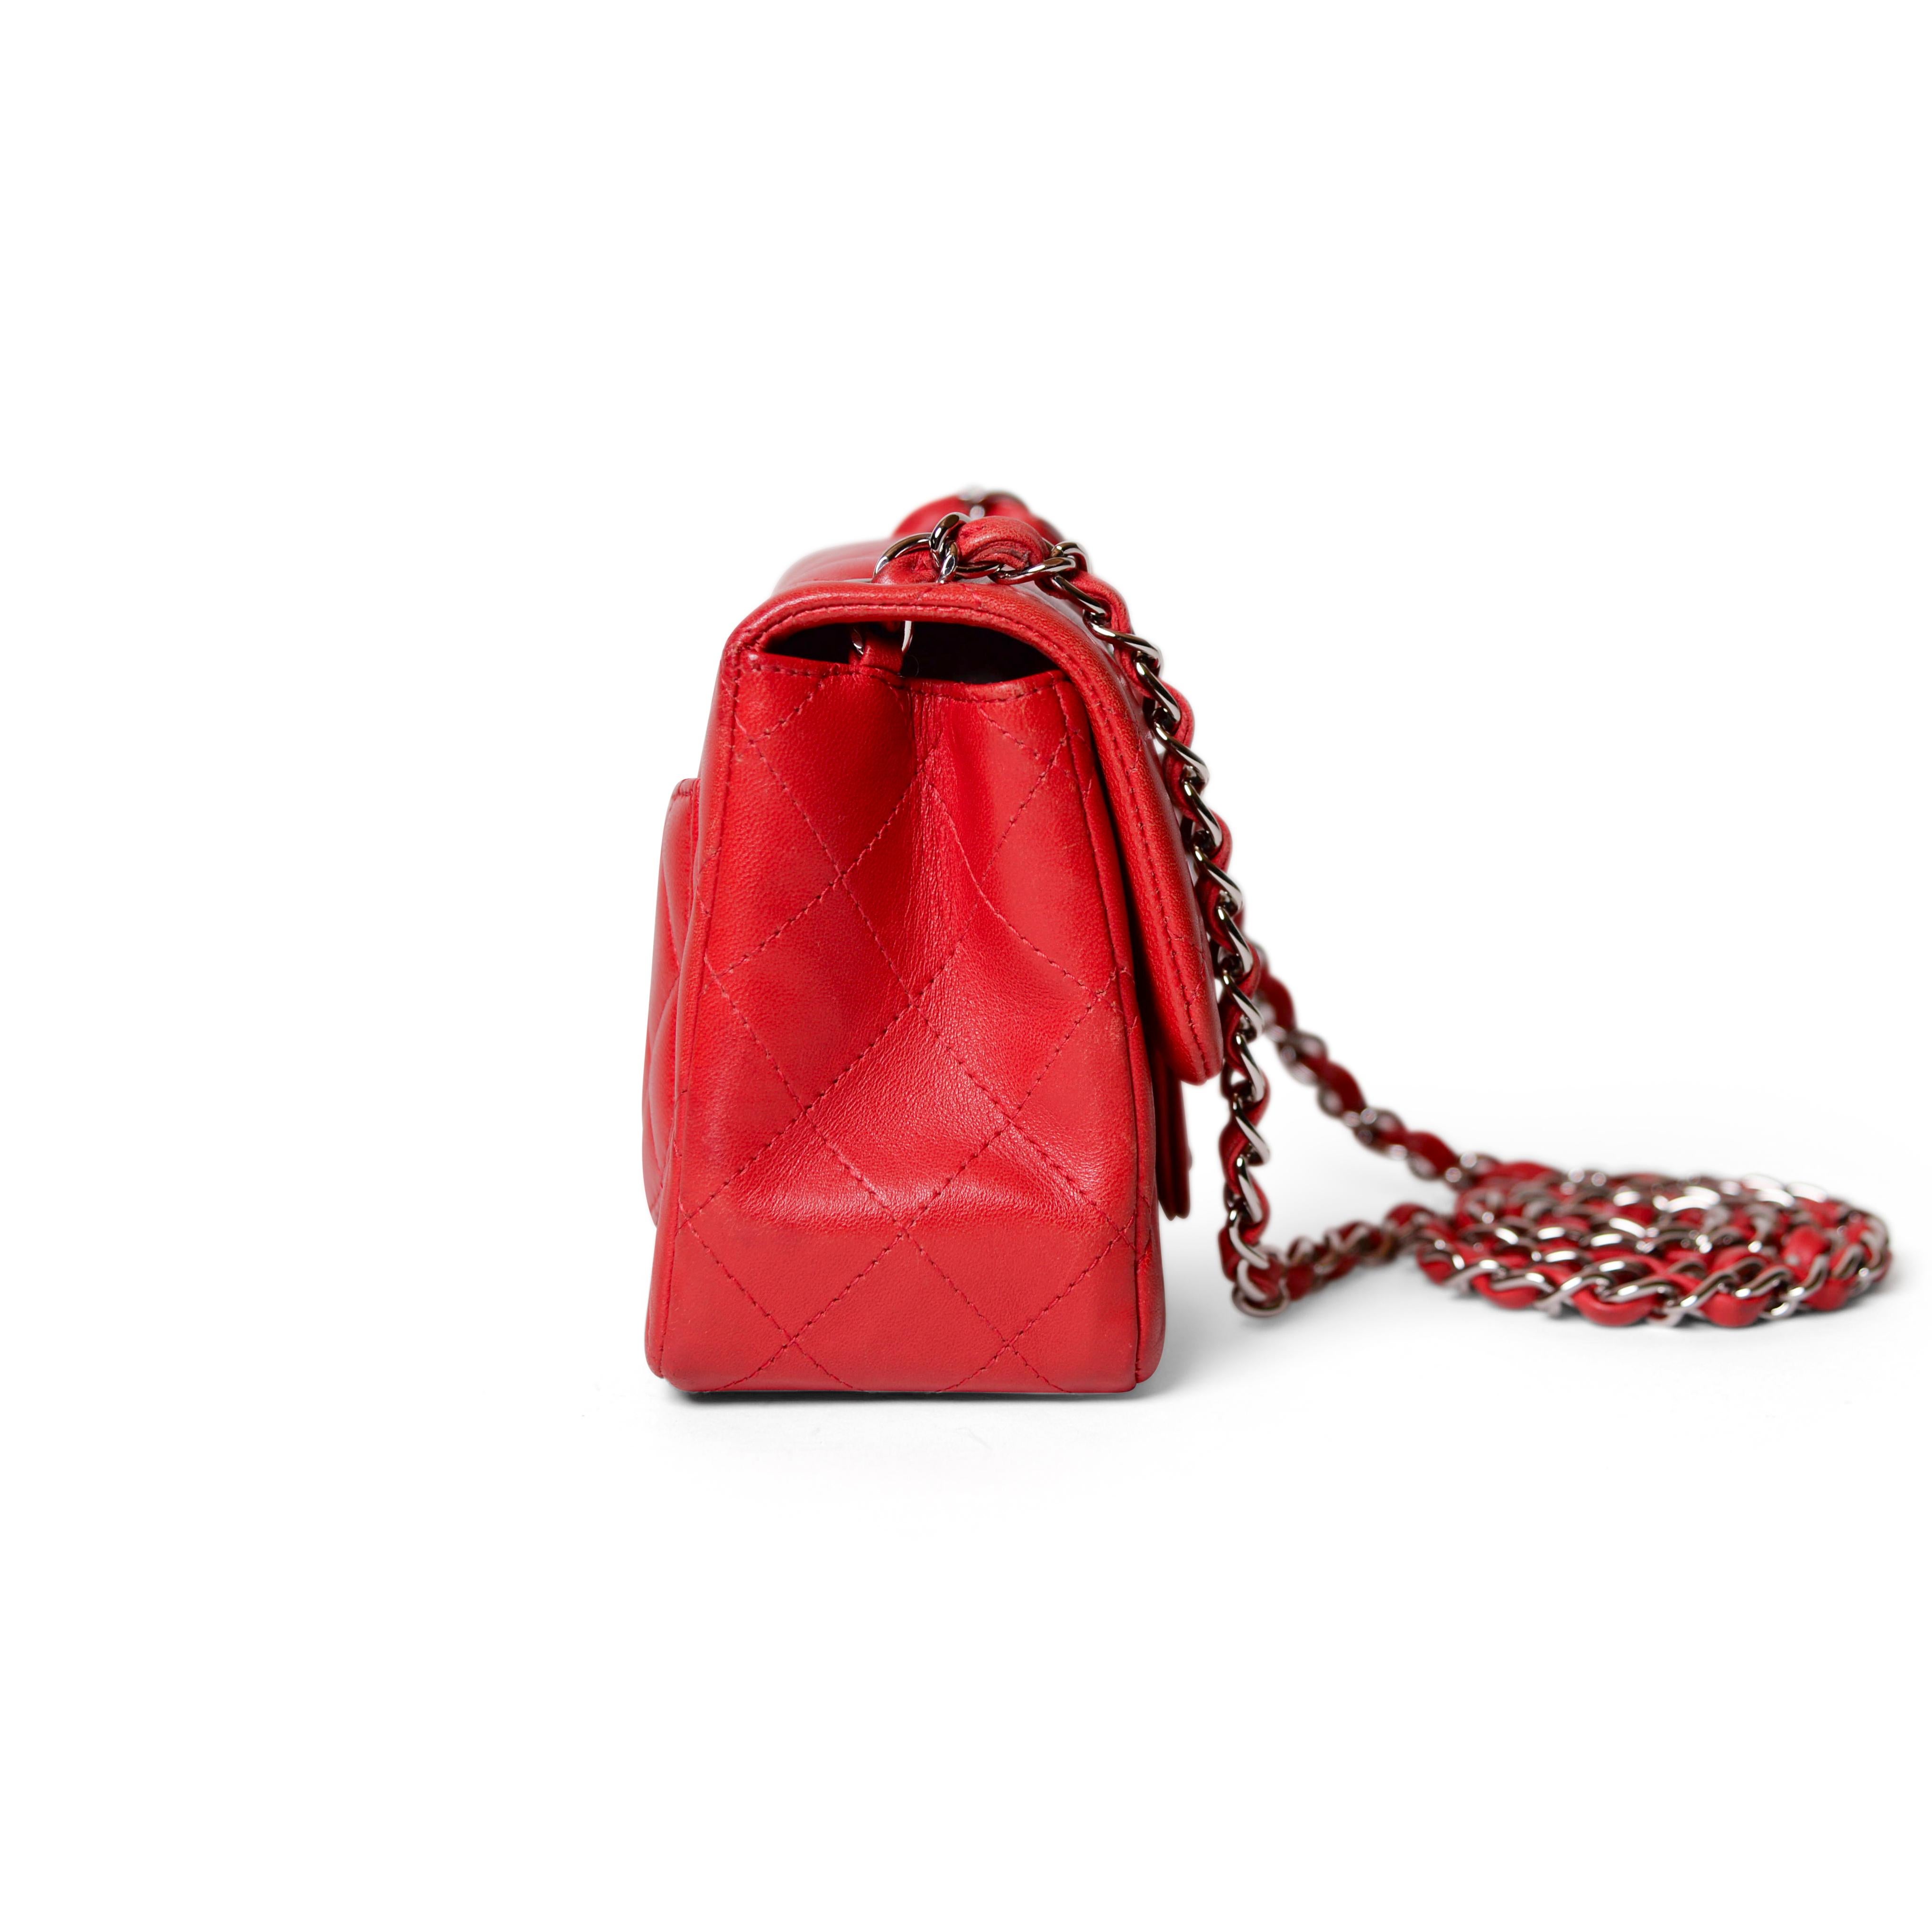 Women's Chanel Red Quilted Lambskin Leather Mini Flap Bag